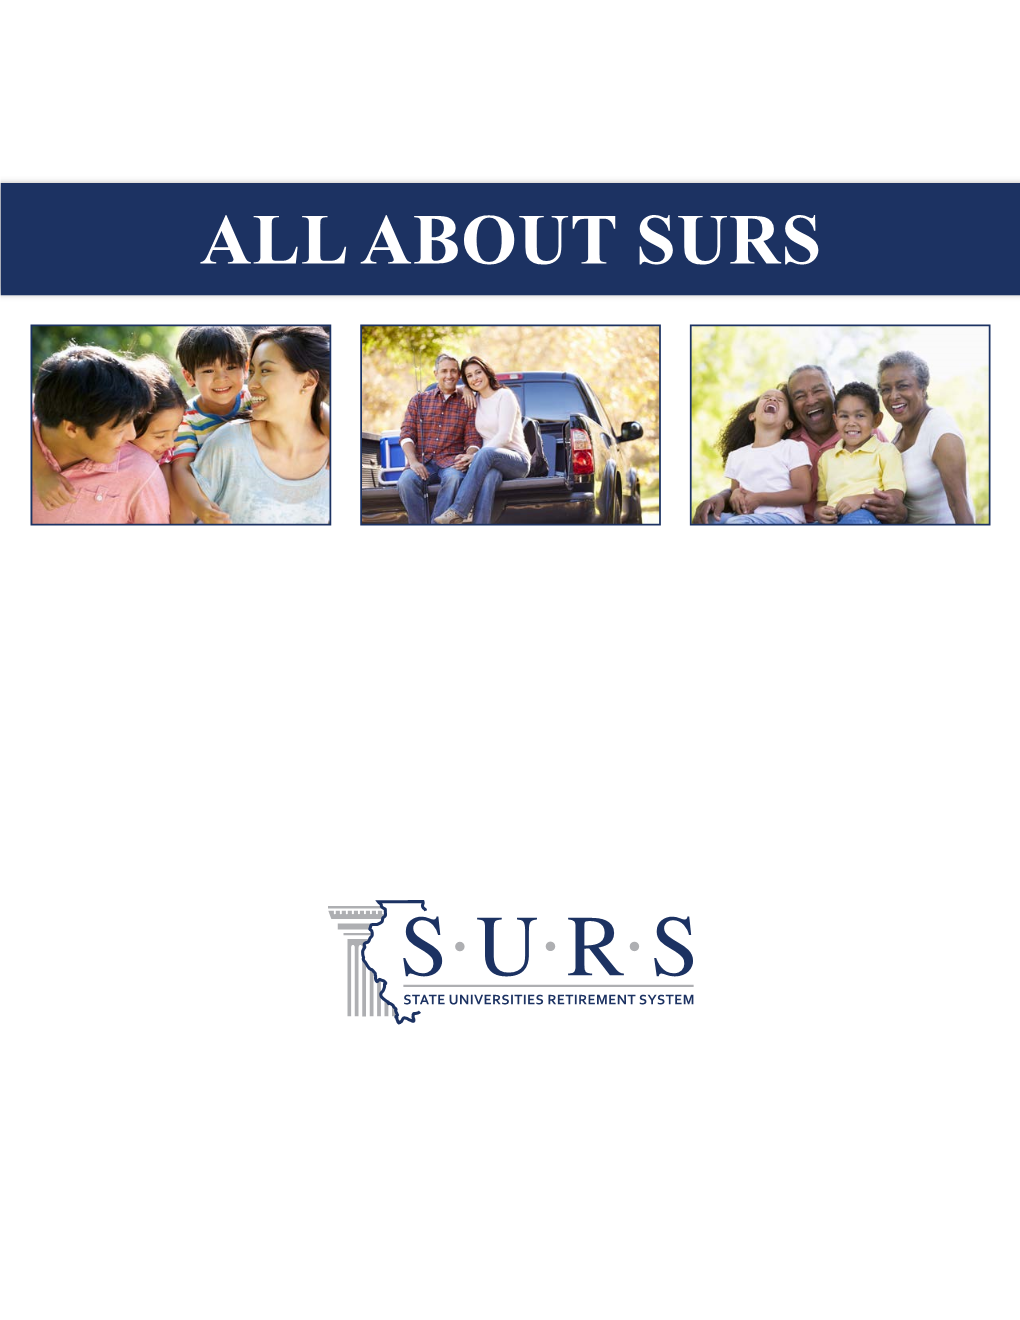 All About Surs